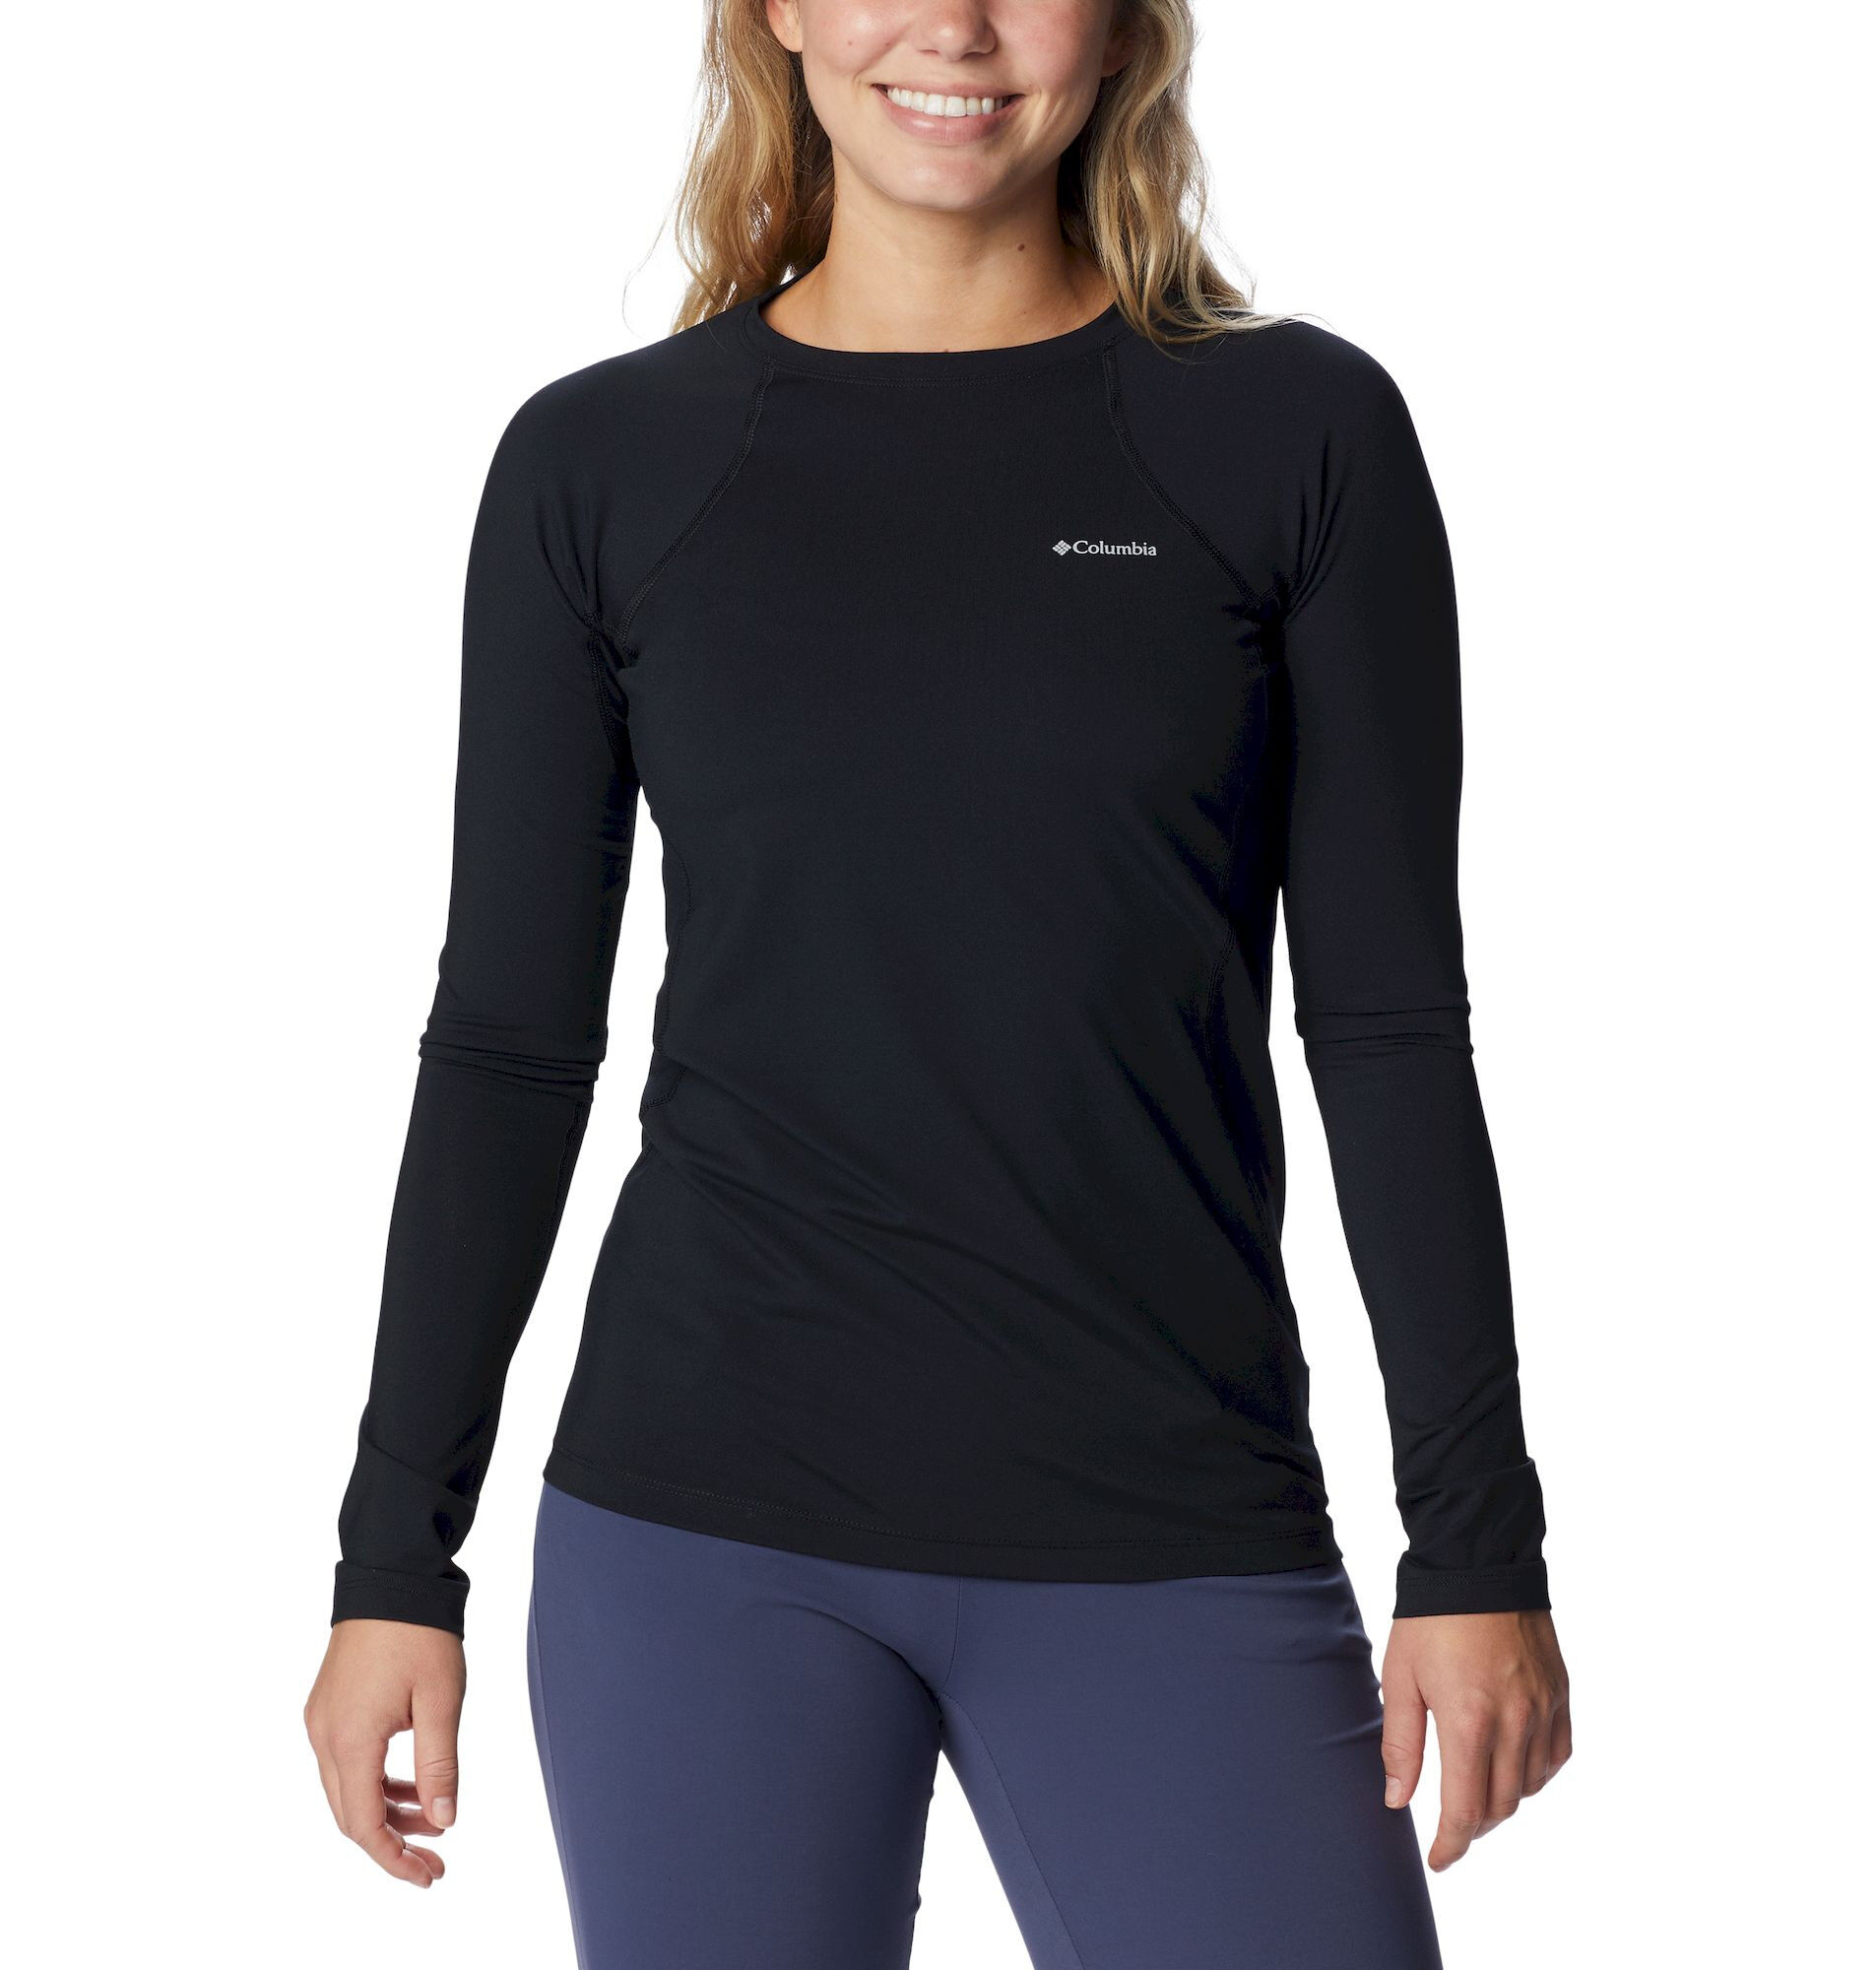 Columbia Midweight Stretch Long Sleeve Top - Ropa interior - Mujer